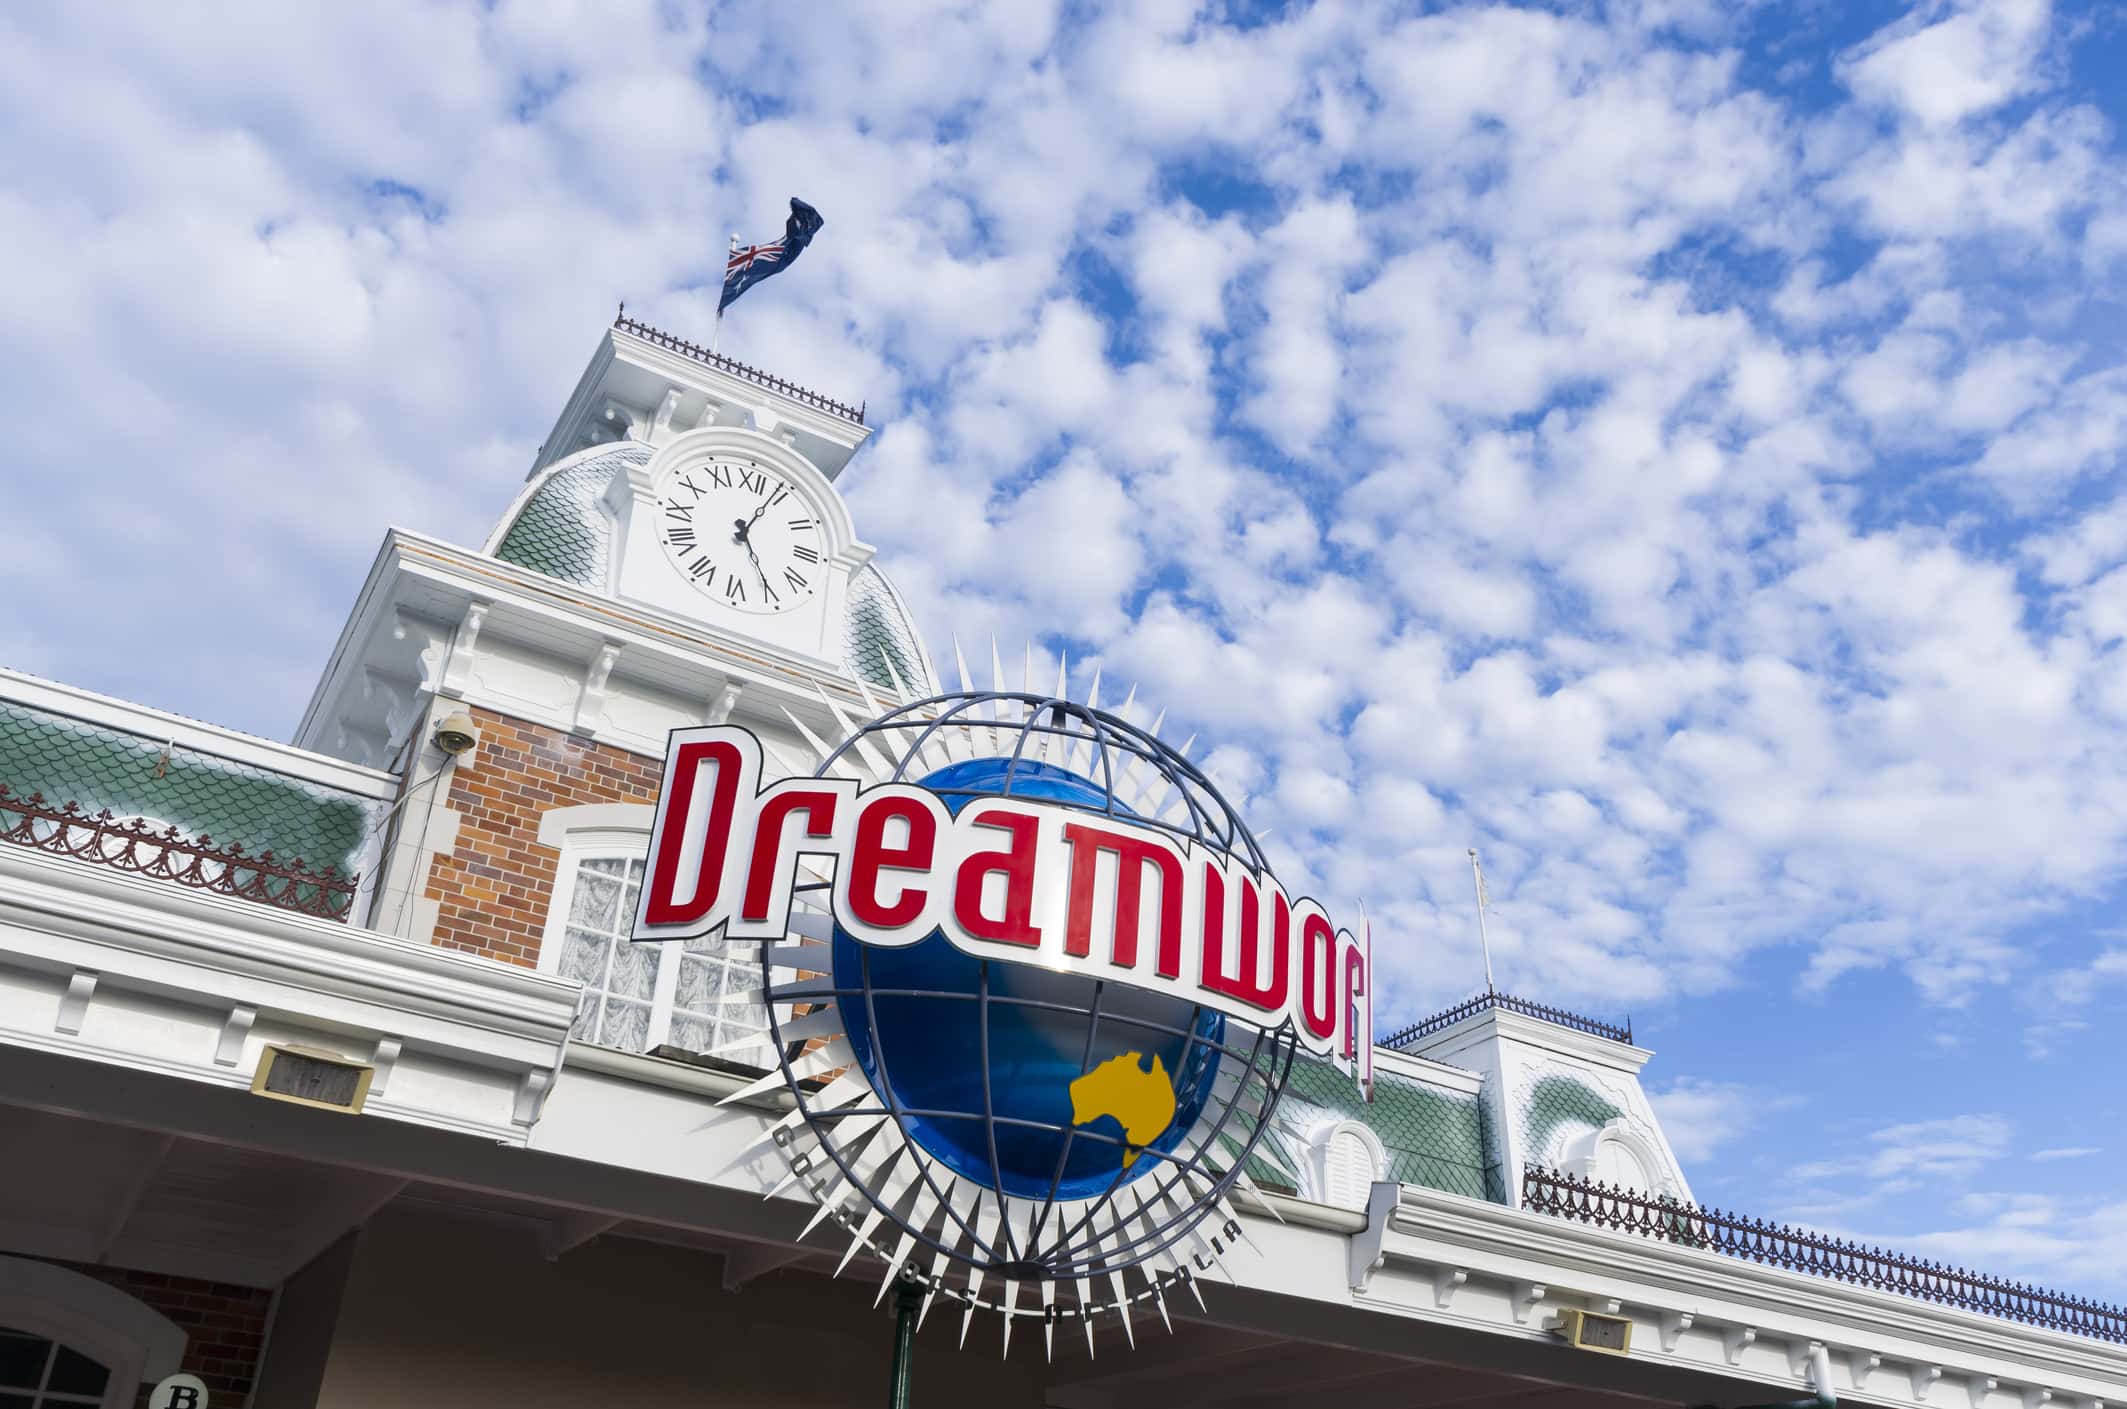 The Facade of Dreamworld Gold Coast entrance building, Australia National flag flying against the beautiful clouds and blue sky.